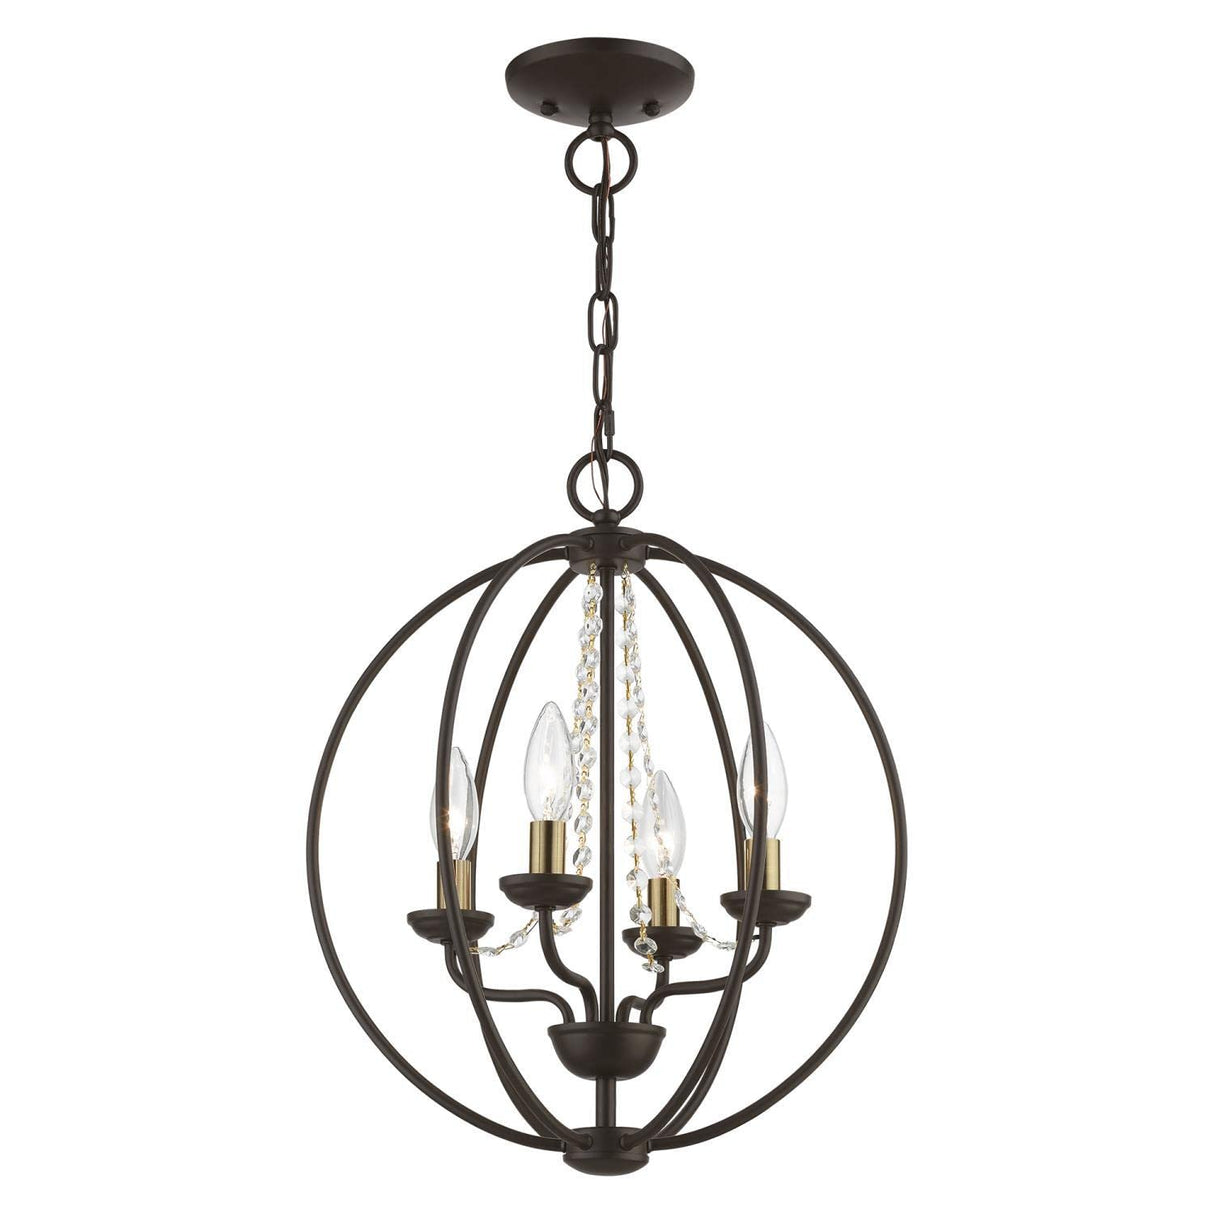 Livex Lighting 40914-07 Arabella - 4 Light Globe Convertible Chandelier In Shabby Chic Style-18.5 Inches Tall and 15 Inches Wide, Finish Color: Bronze/Antique Brass